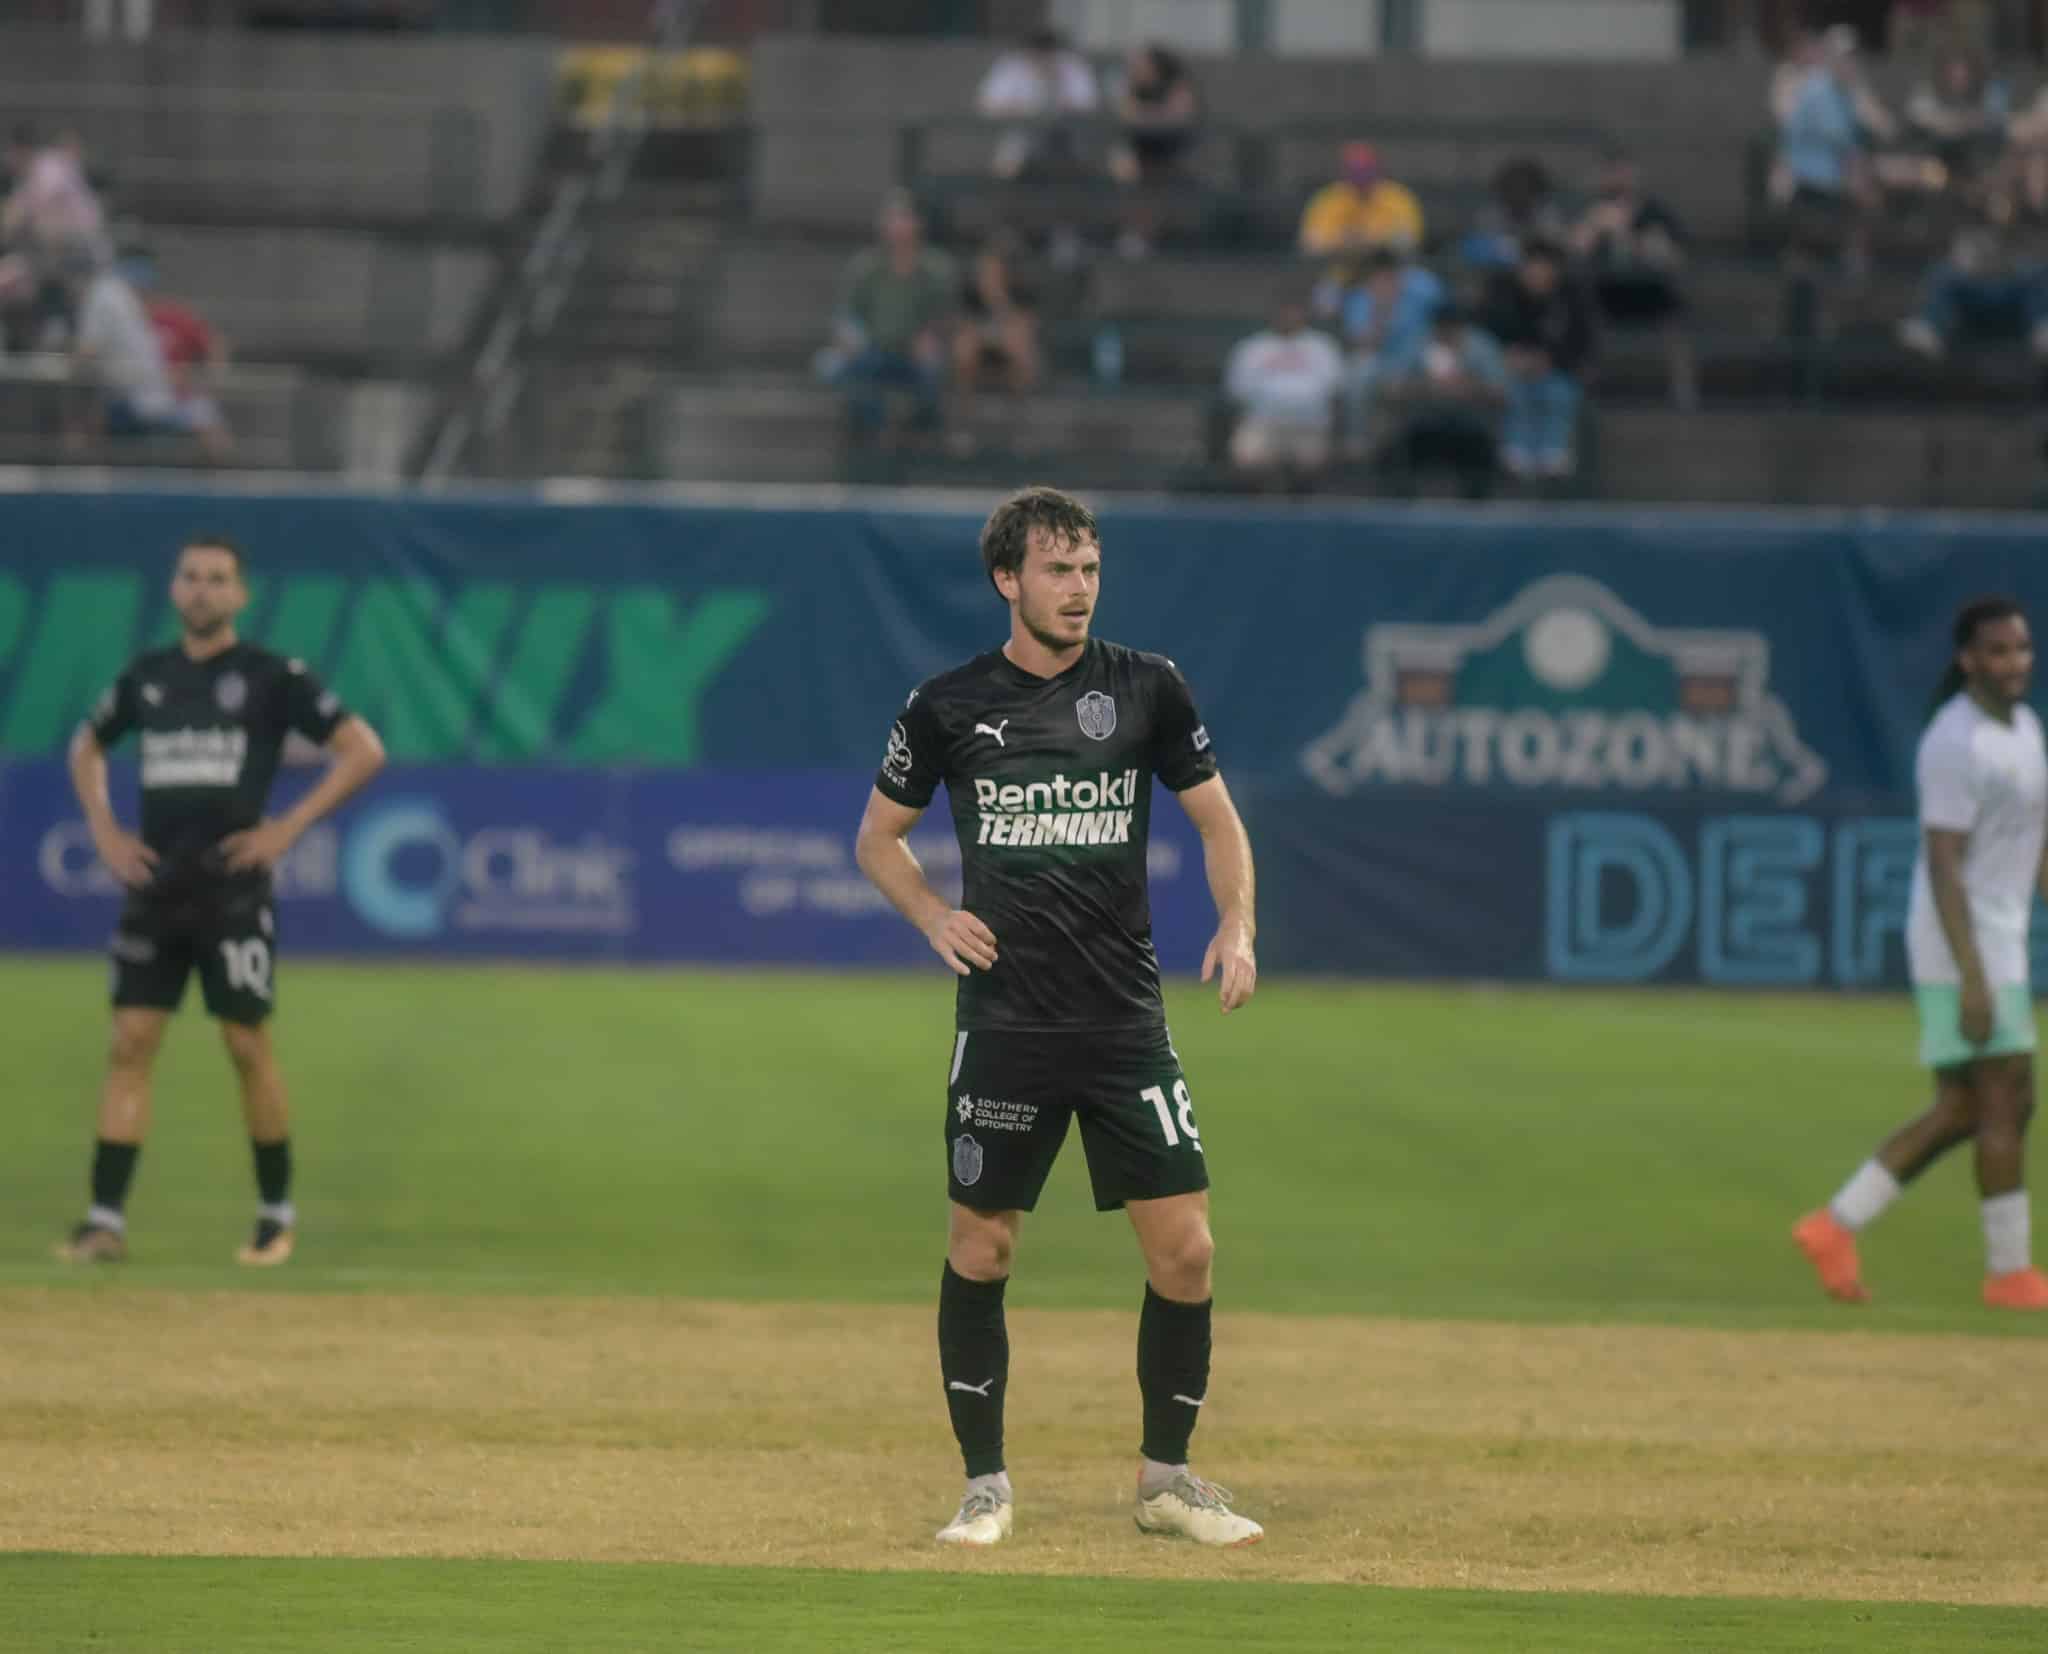 Featured image for “Memphis 901 FC surge ahead late in dramatic win over Tampa Bay Rowdies”